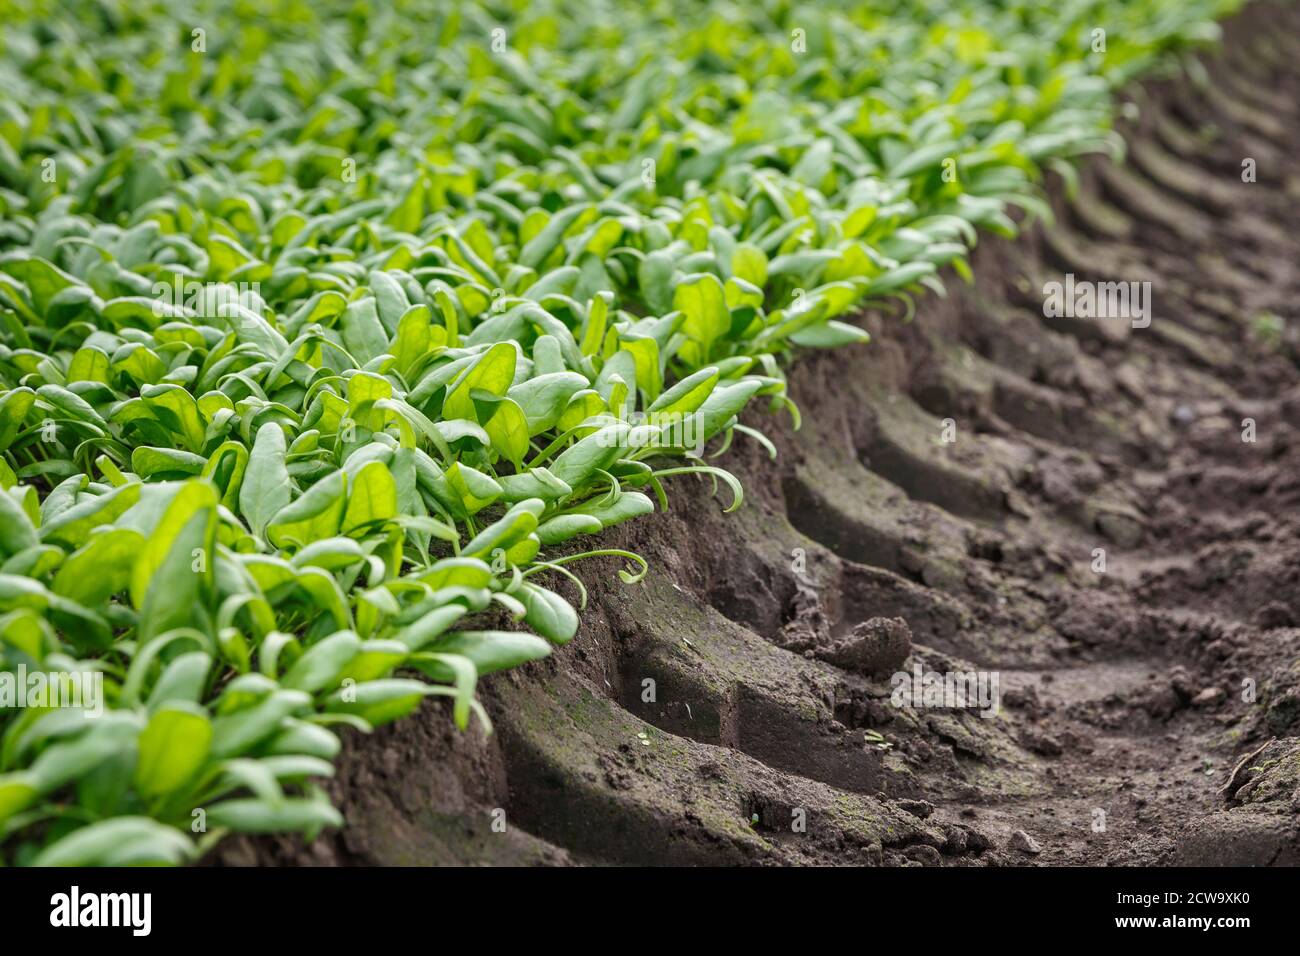 Organic spinach growing in a soil in a greenhouse. Agricaltural production concept Stock Photo